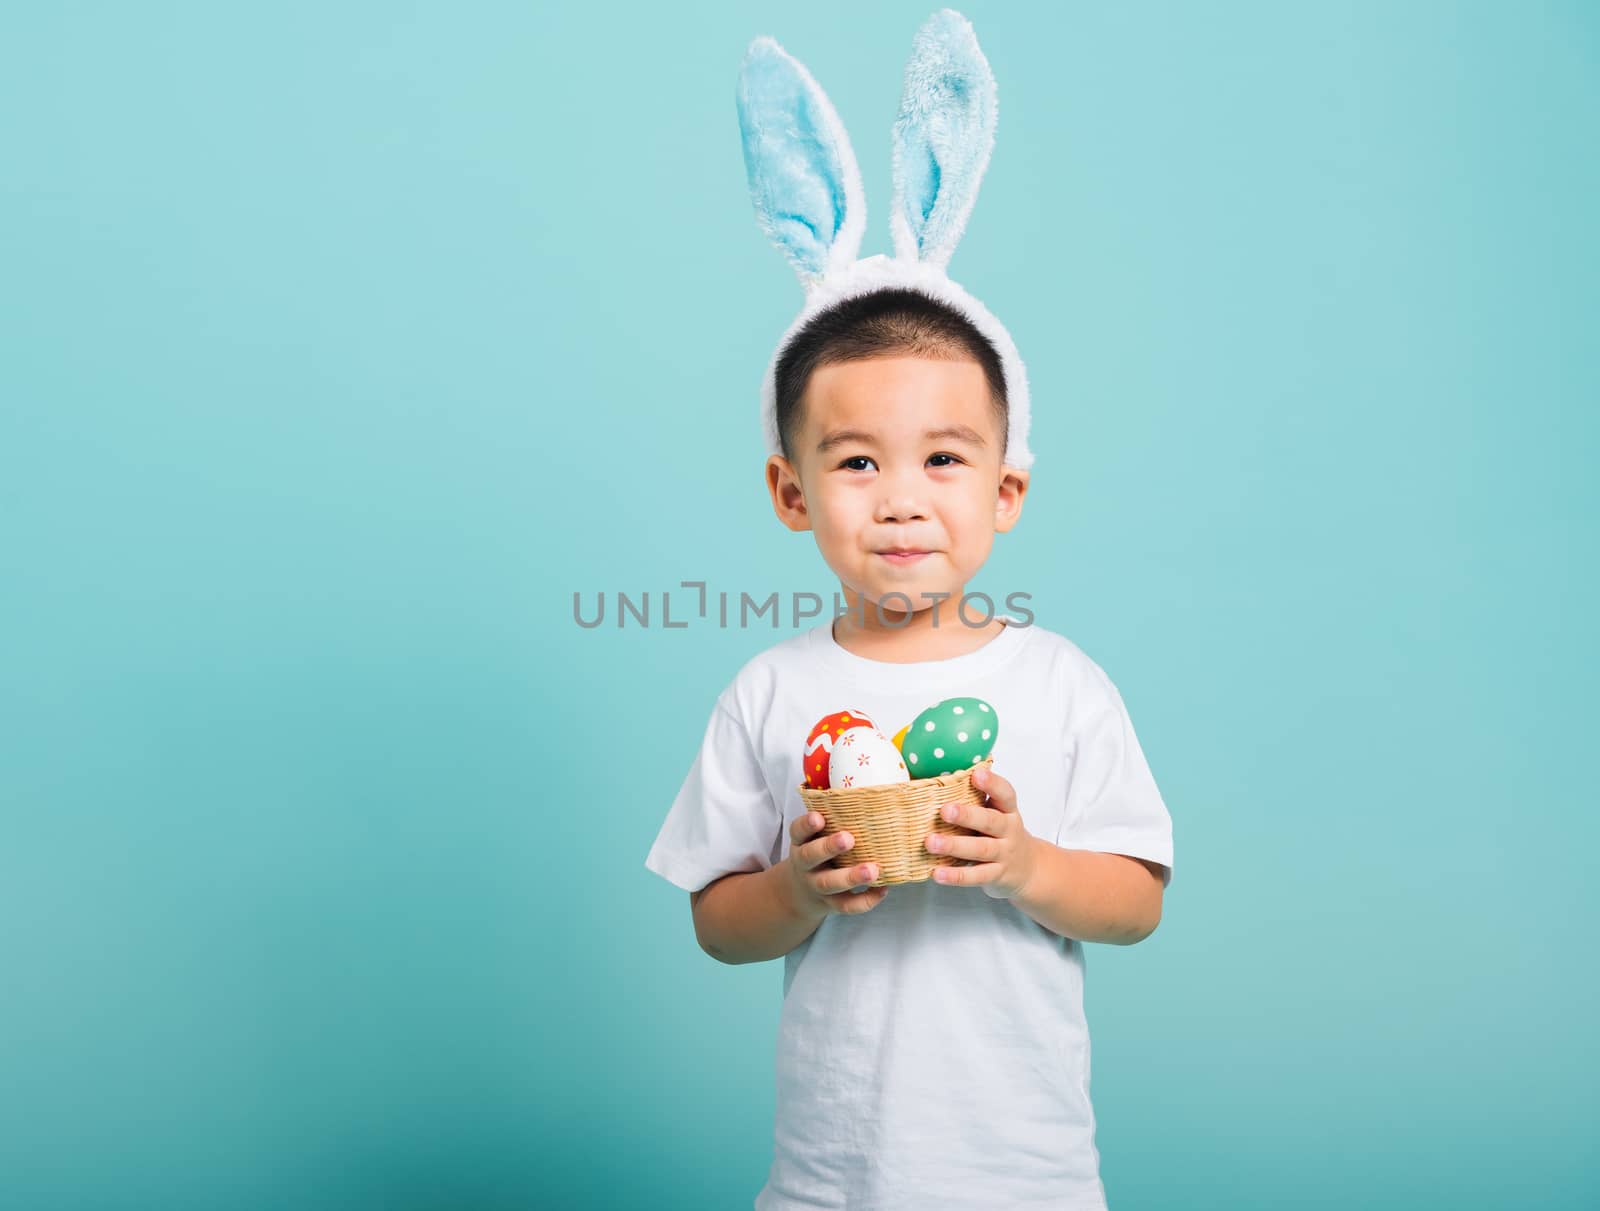 Asian cute little child boy smile beaming wearing bunny ears and a white T-shirt, standing to hold a basket with full Easter eggs on blue background with copy space